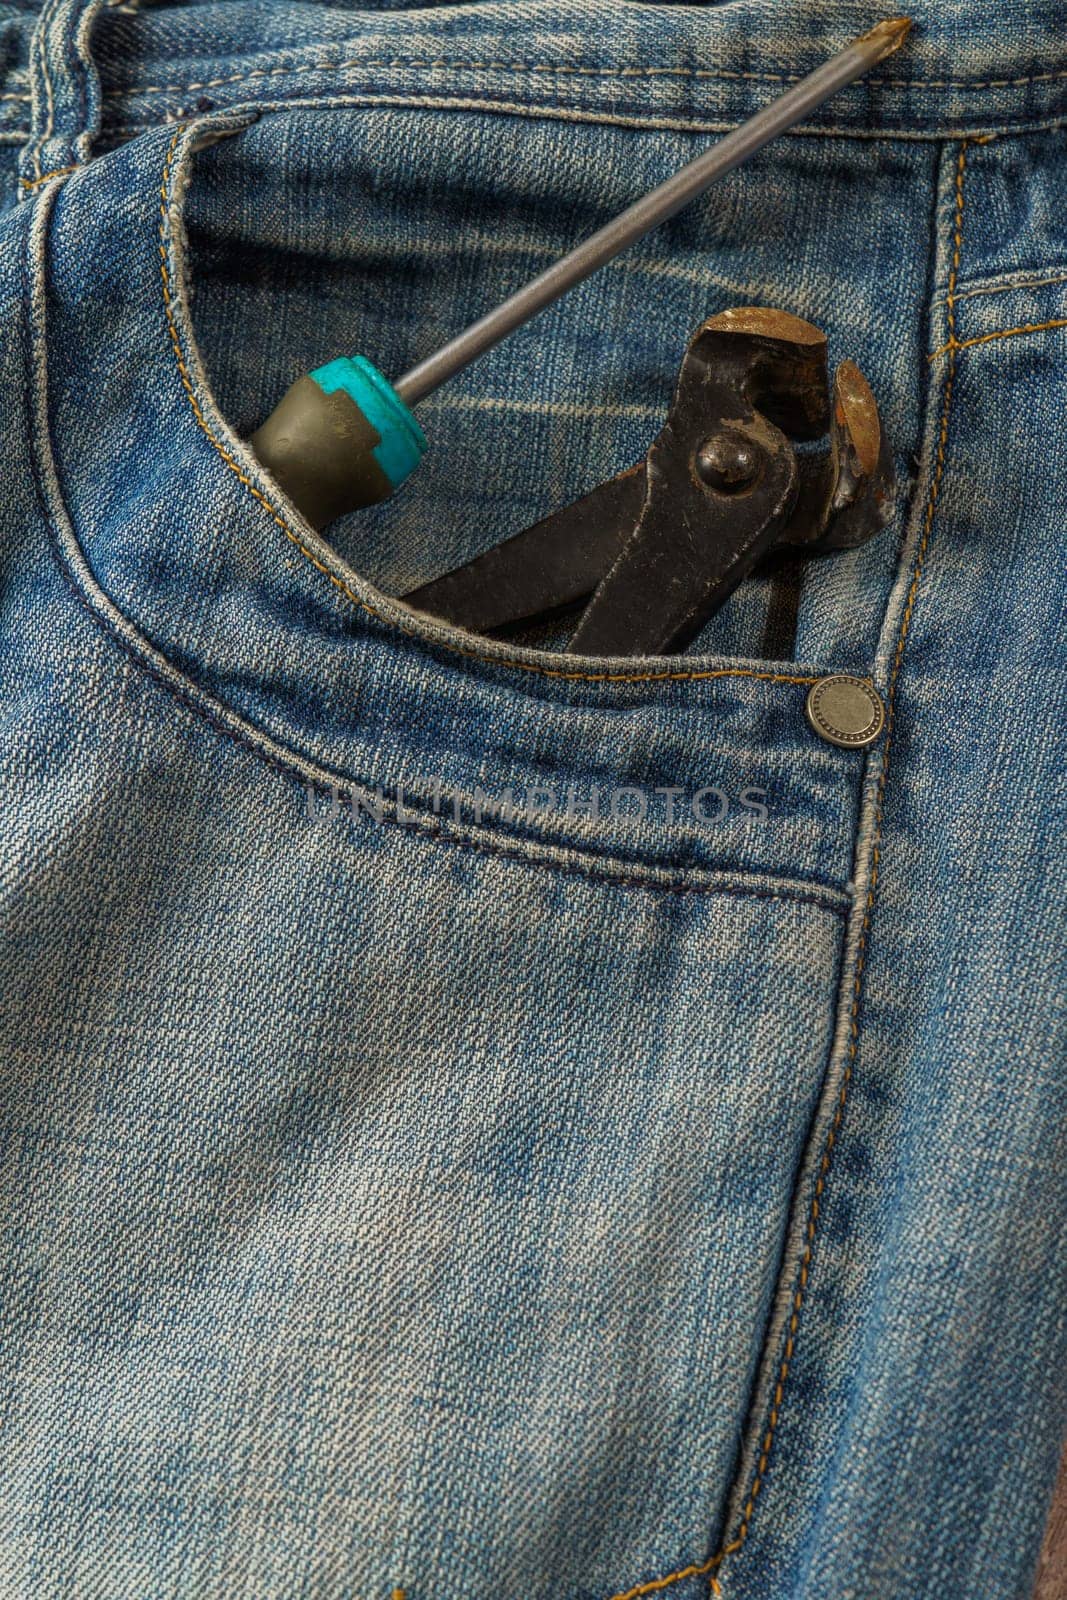 jeans with tools sticking out of pocket by joseantona